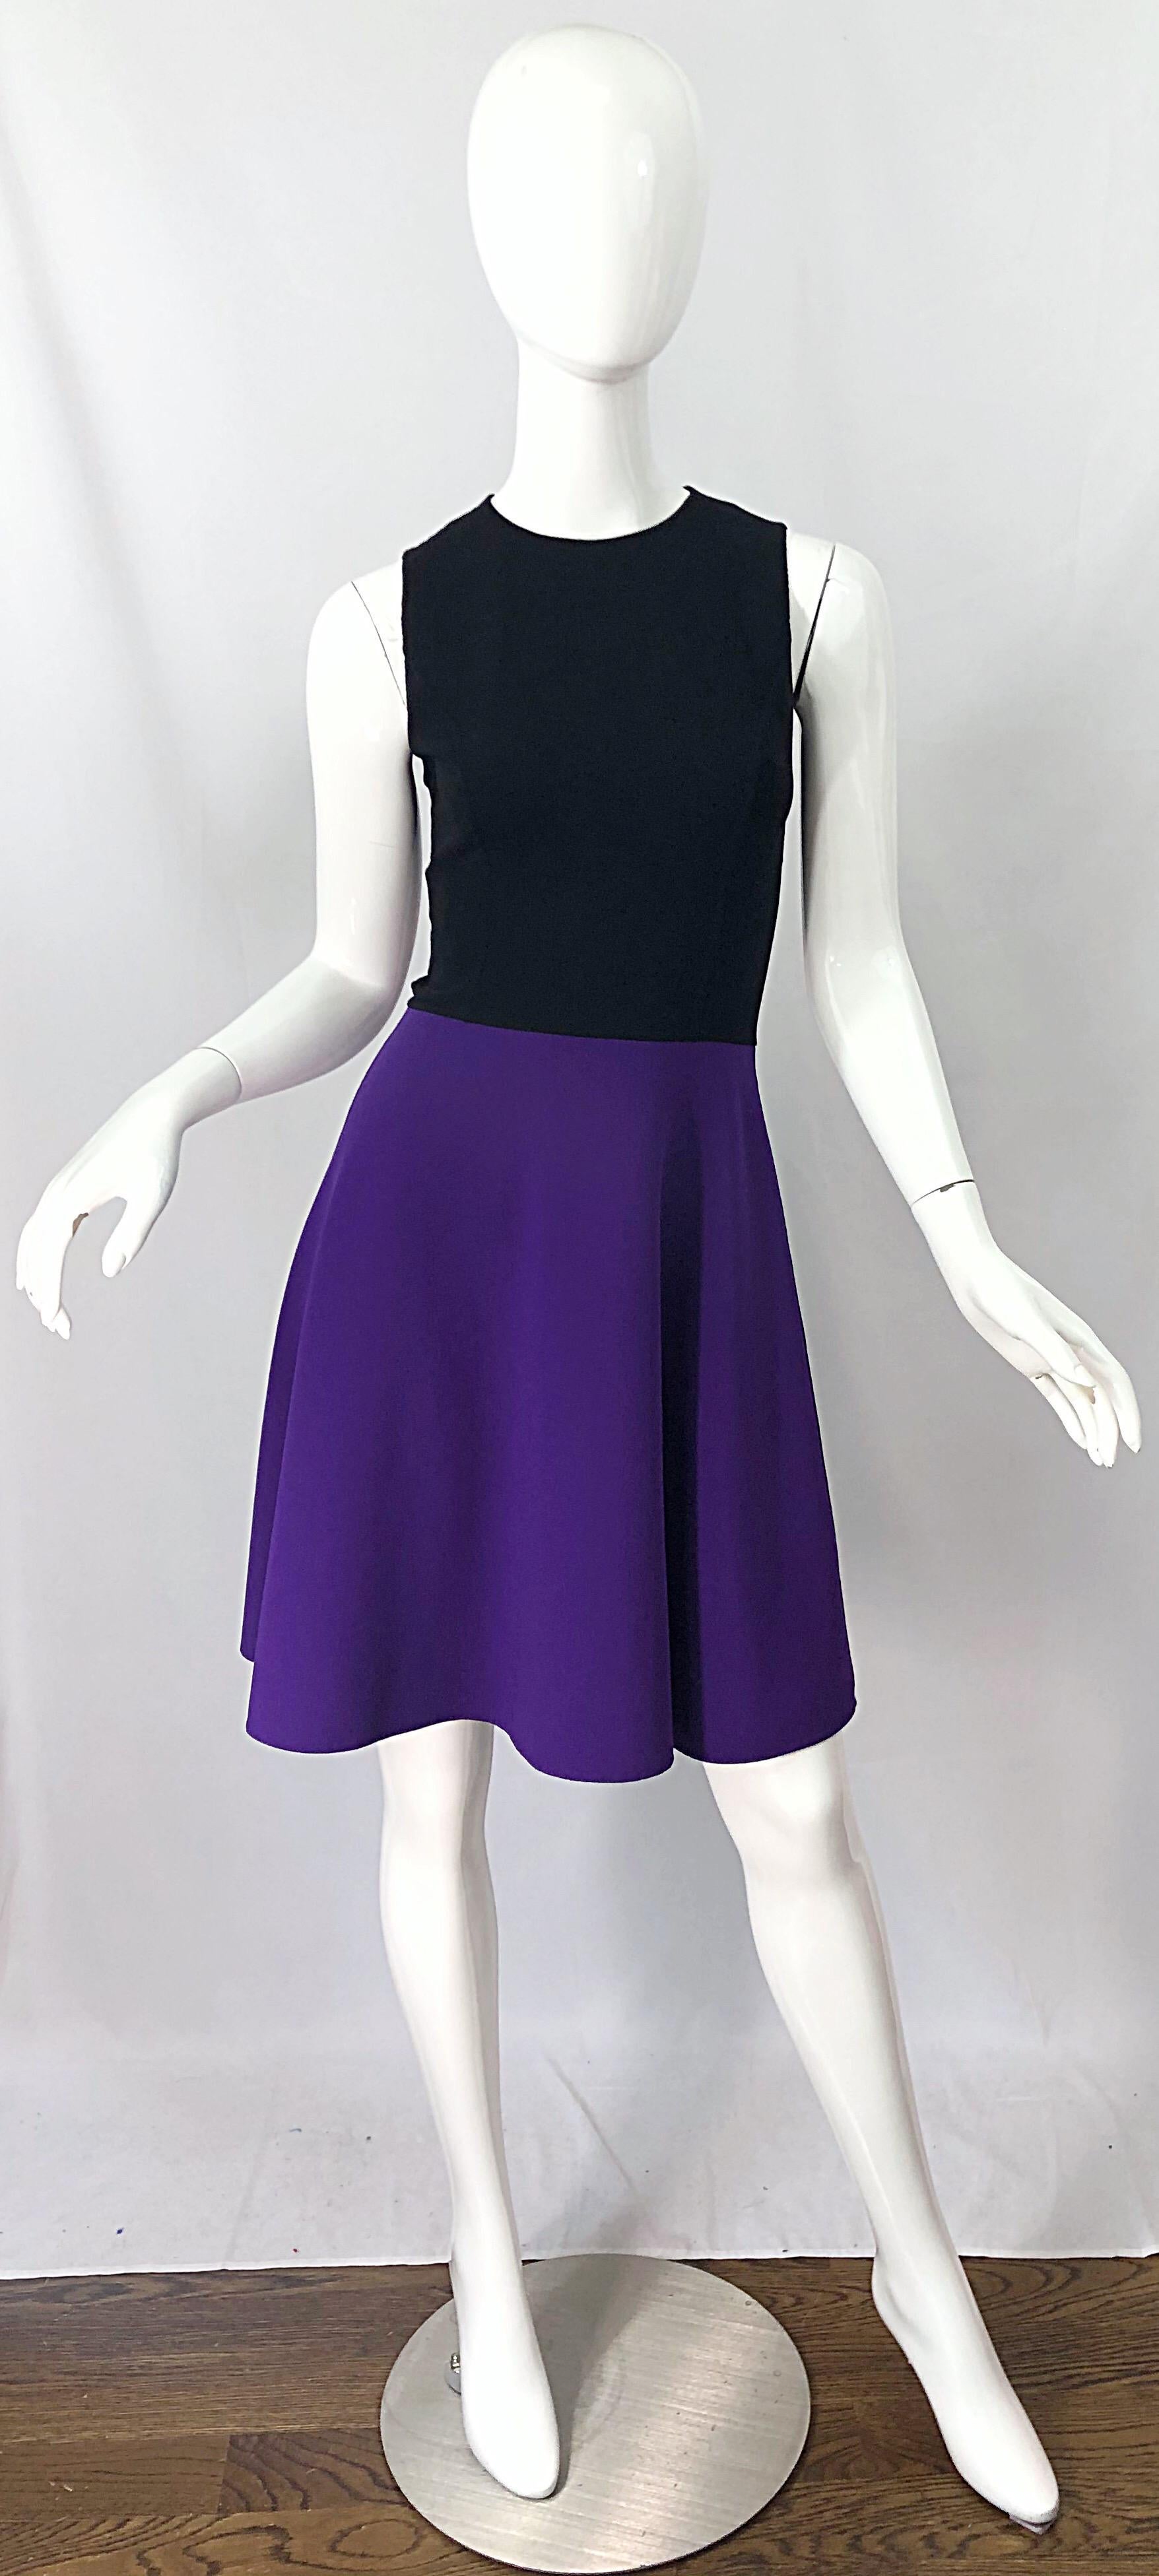 Wonderful mid 2000s $1,850 MICHAEL KORS COLLECTION black and purple color block sleeveless A -Line / Skater dress! Features a tailored bodice with a full skirt. Hidden zipper up the back with hook-and-eye closure. Can easily work for day or evening